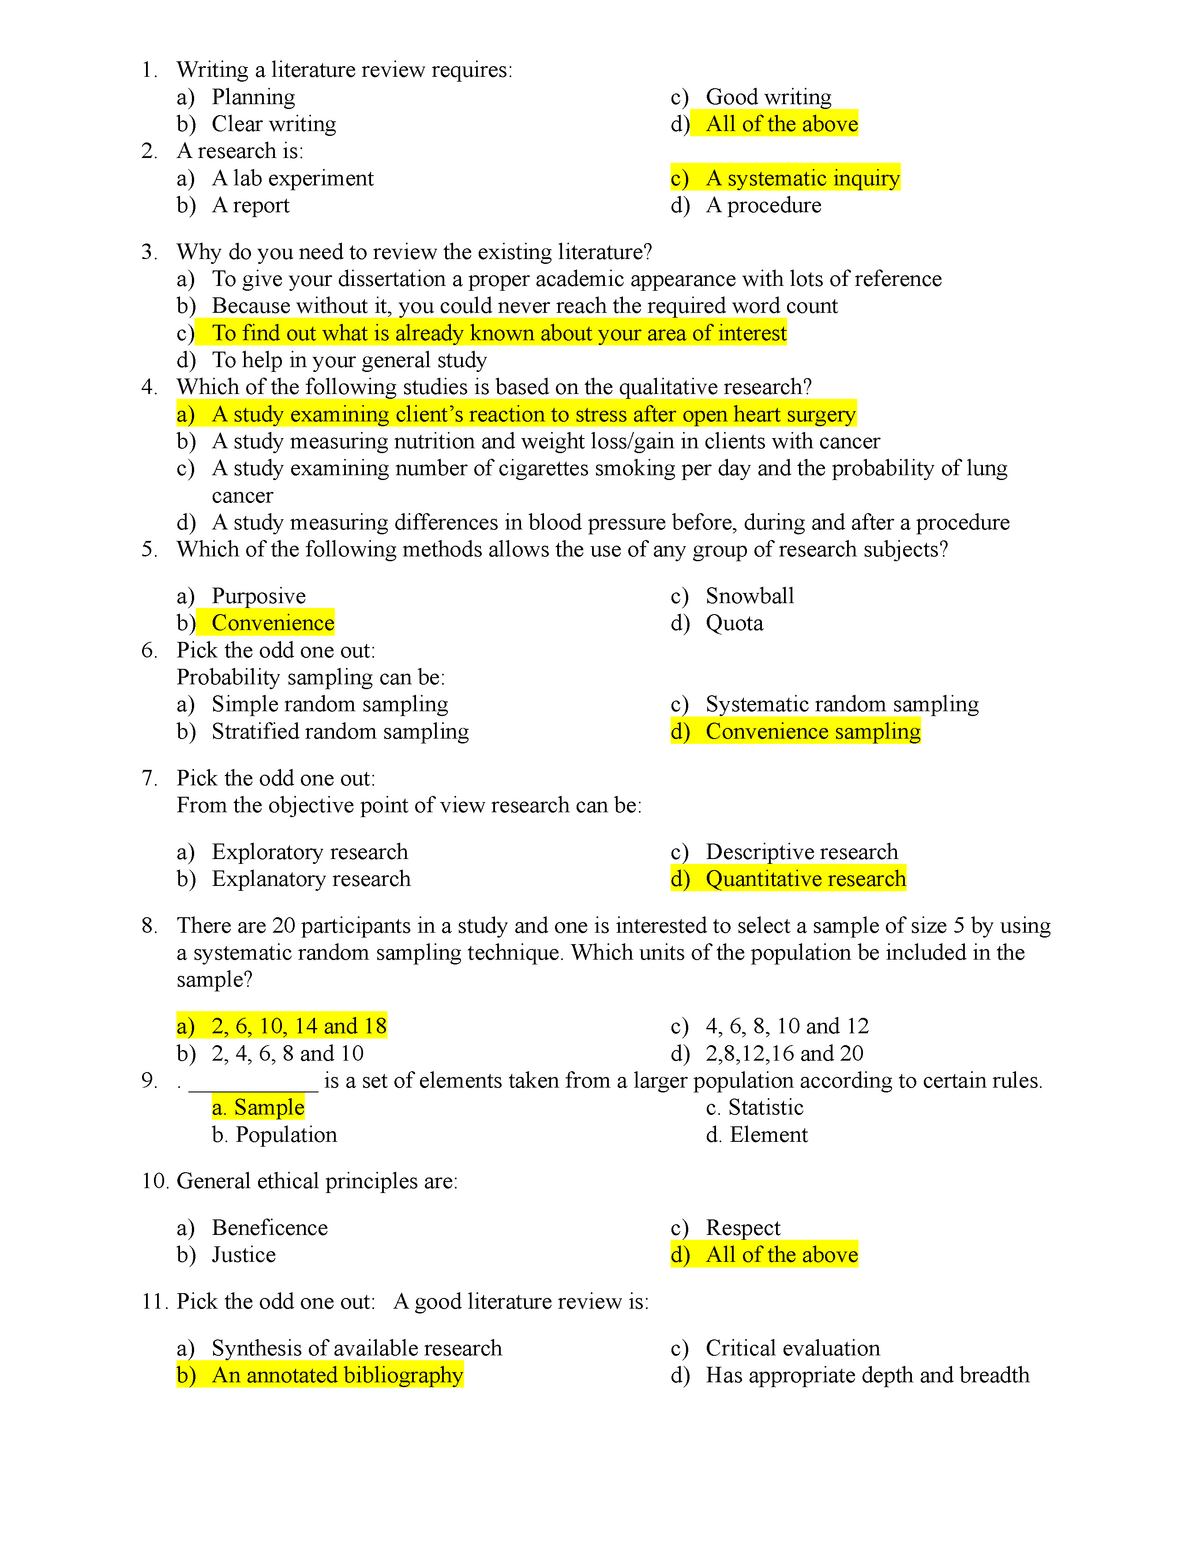 literature review questions and answers